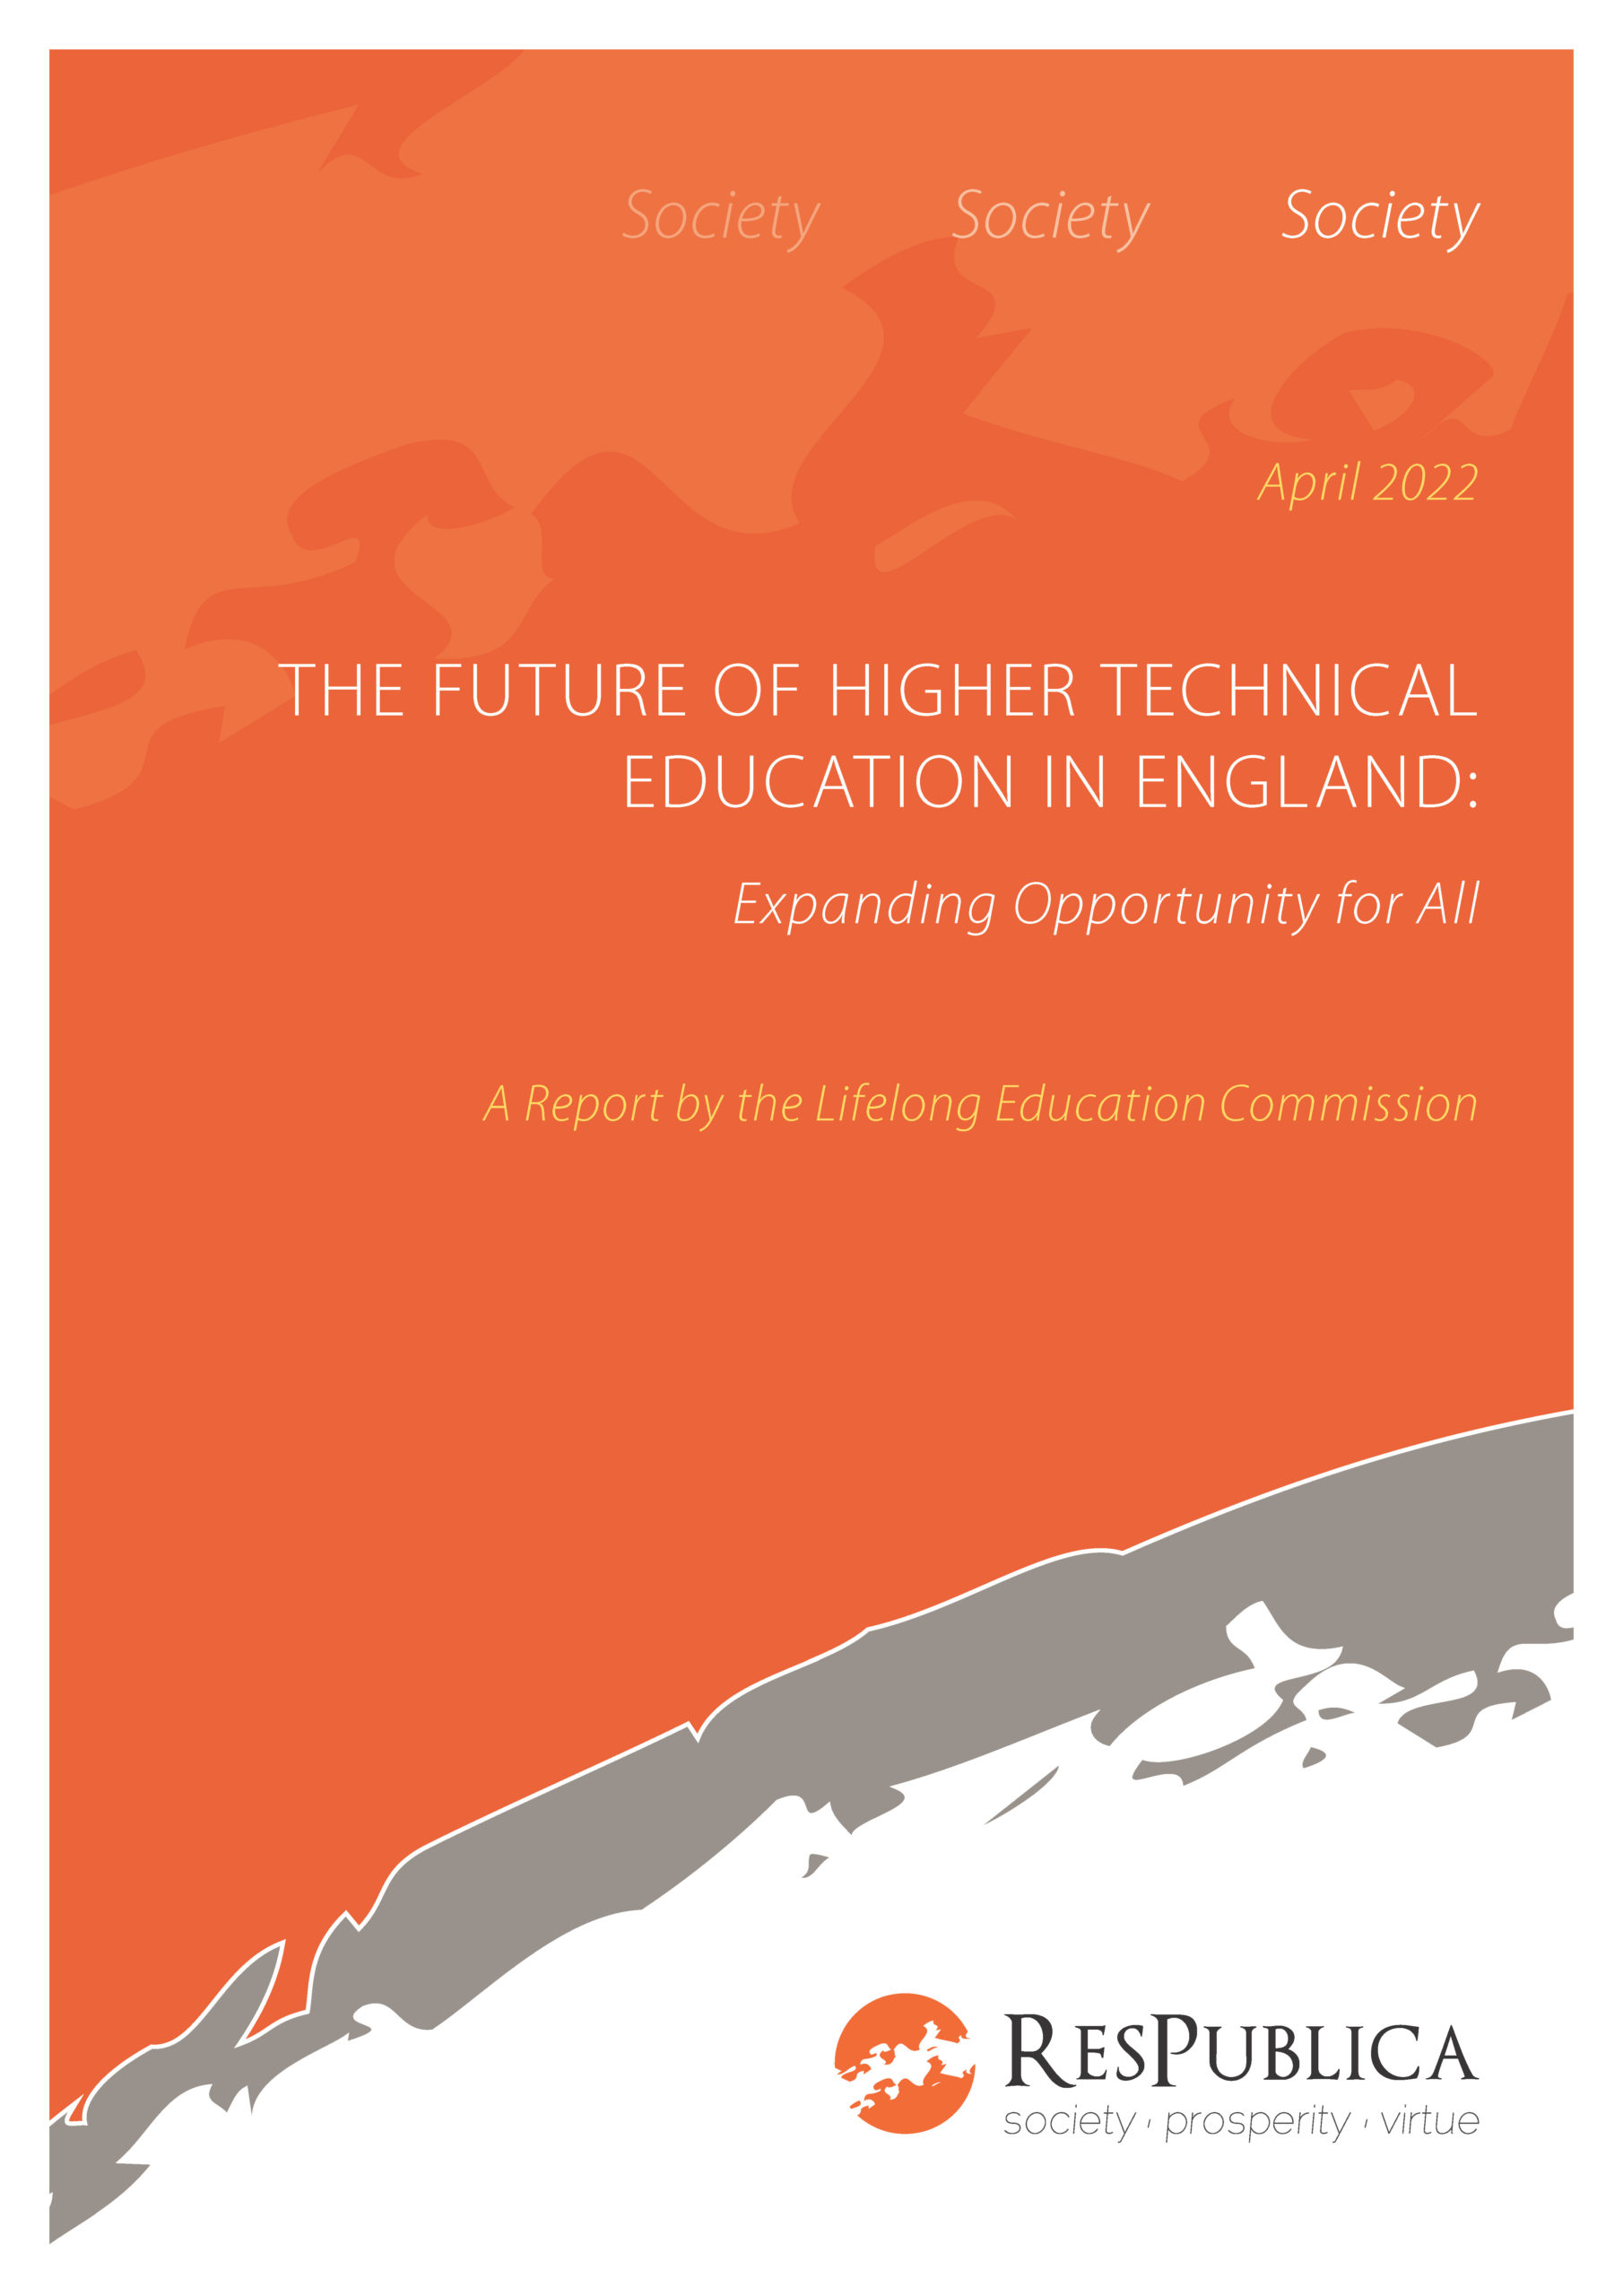 The Future of Higher Technical Education in England: Expanding Opportunity for All